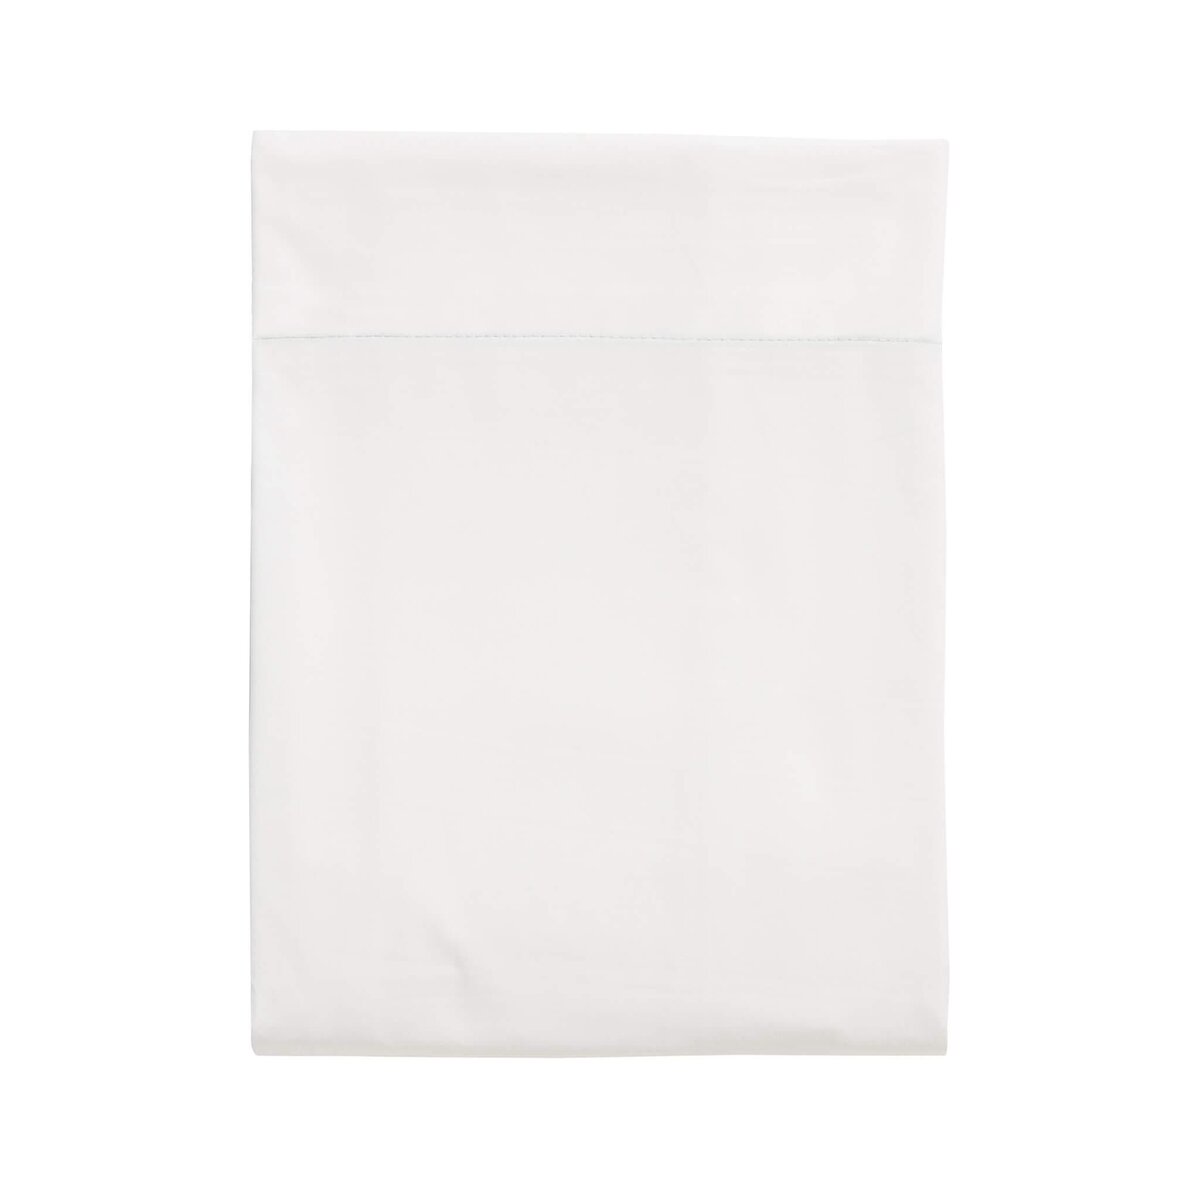 Terre de Nuit Drap plat percale made in France